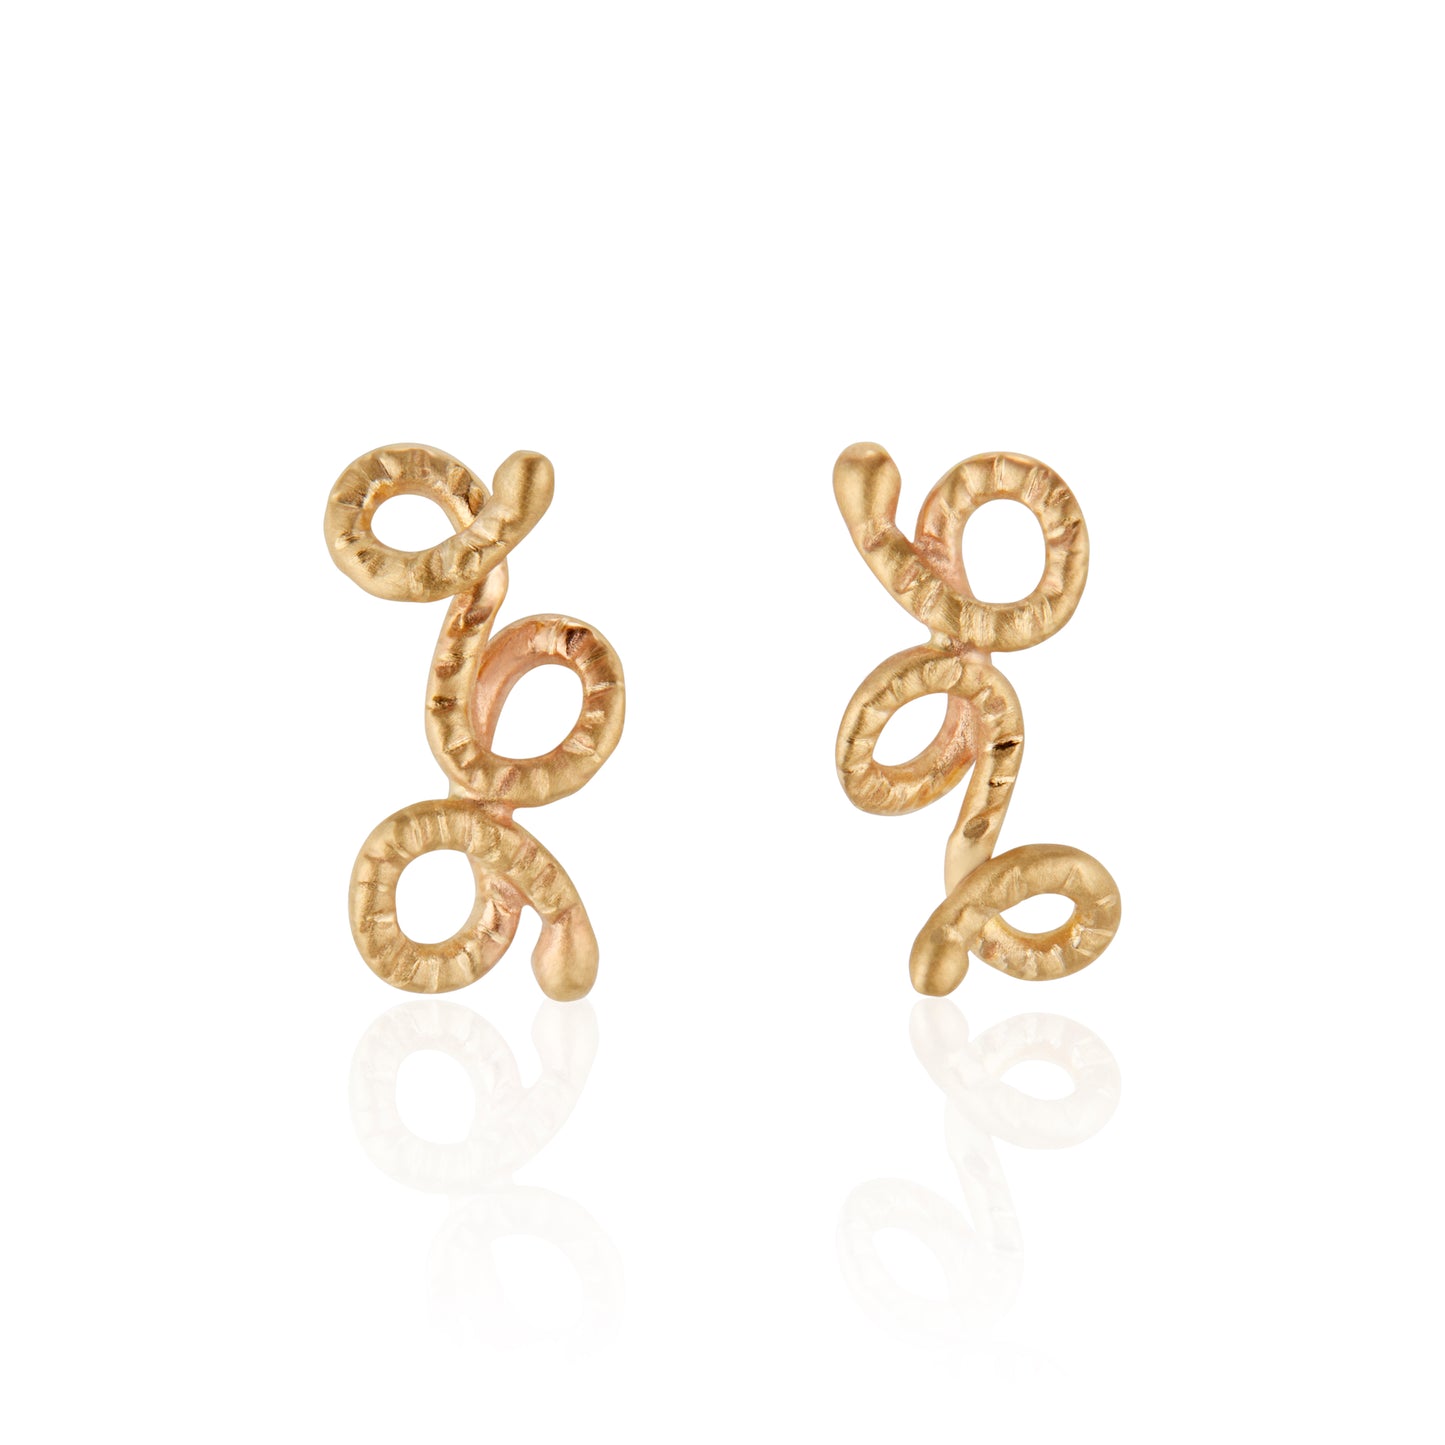 The Child Studs in Gold